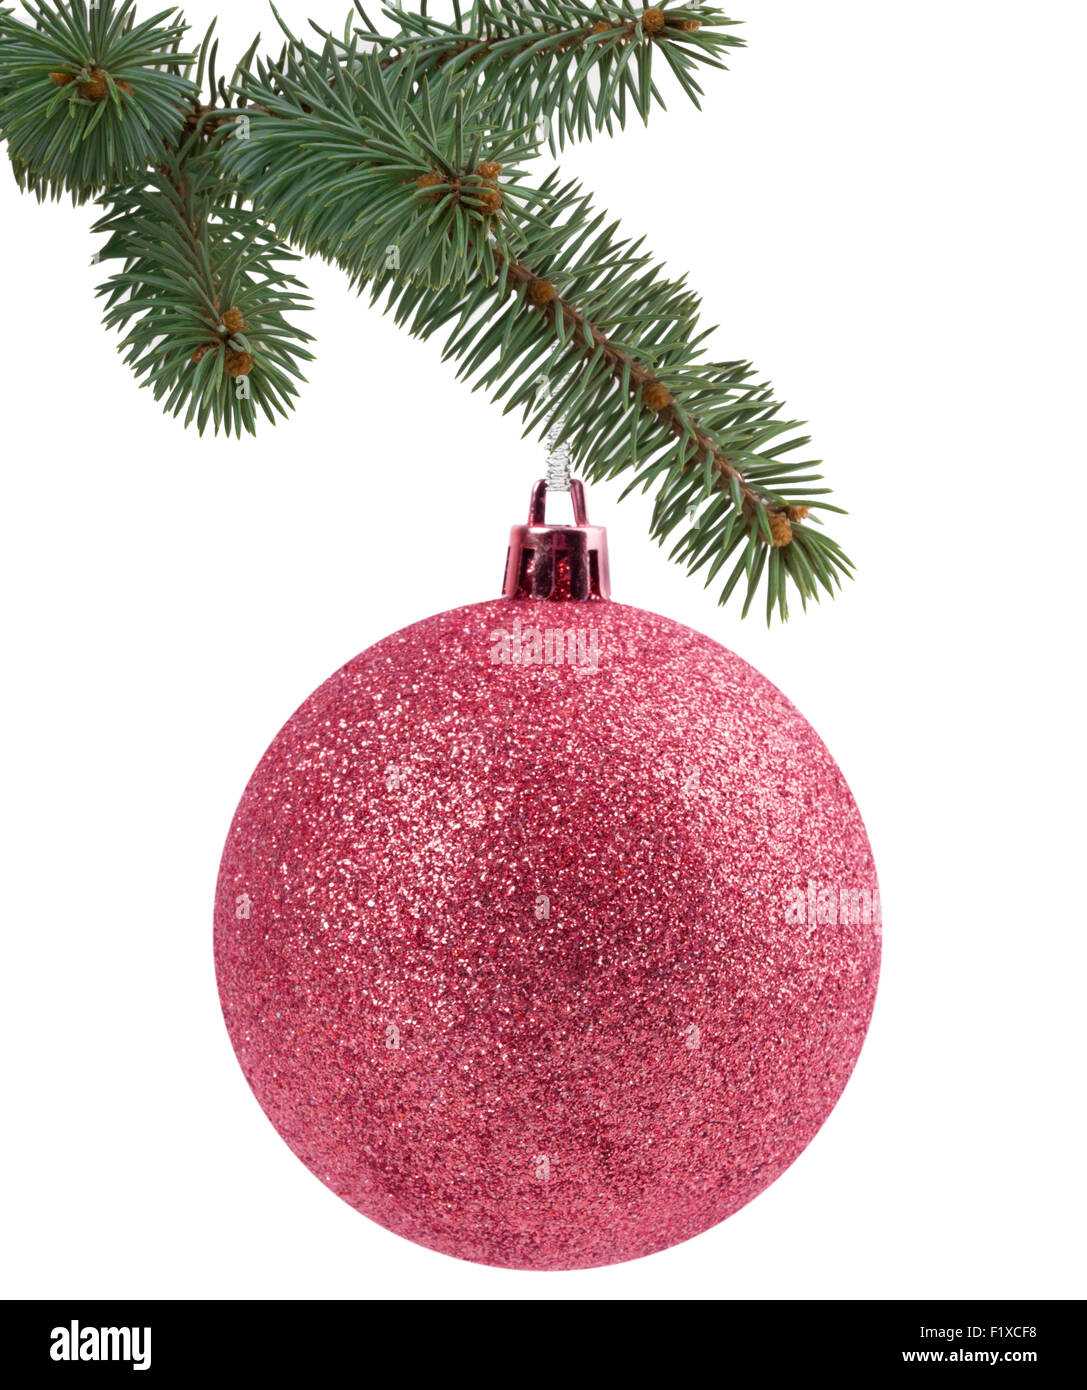 Christmas tree branch with a ball. Stock Photo